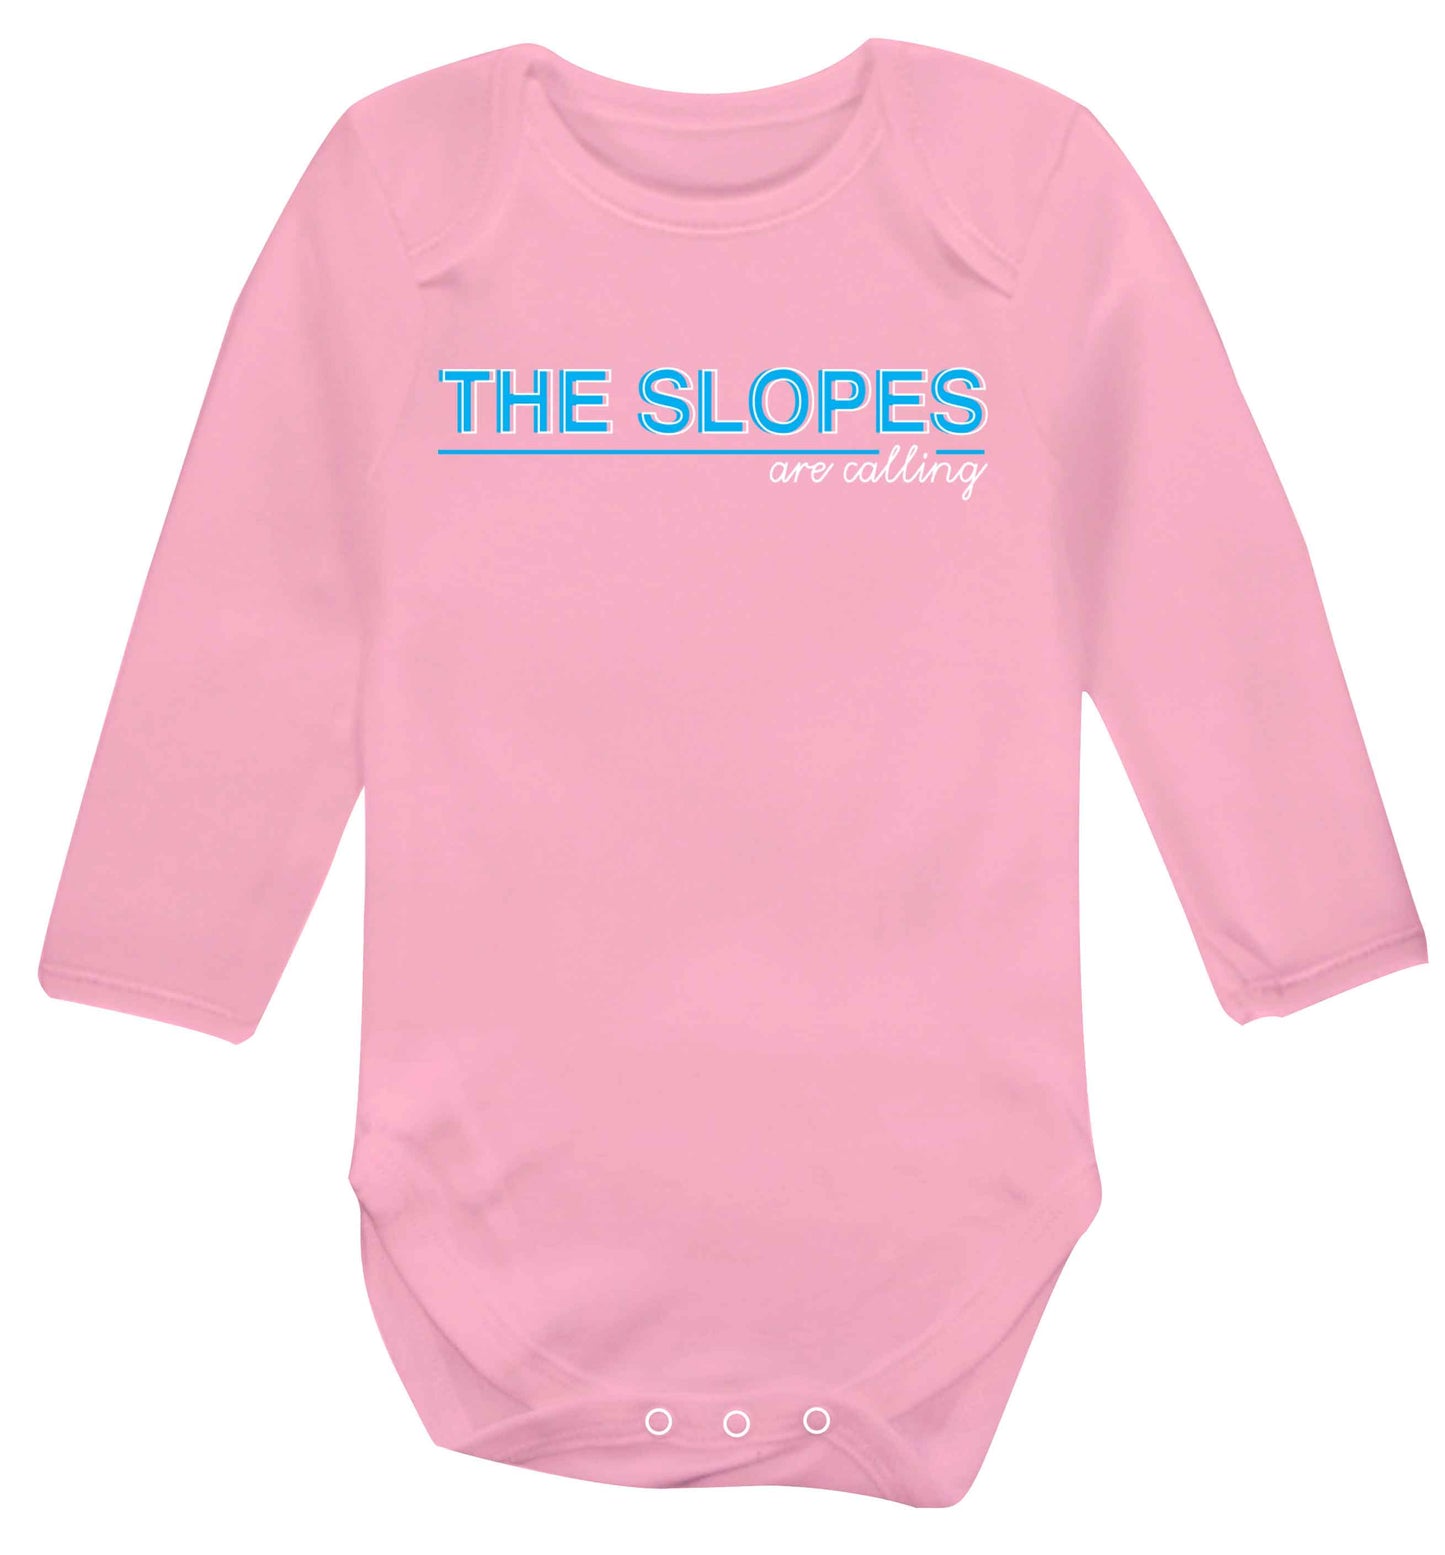 The slopes are calling Baby Vest long sleeved pale pink 6-12 months